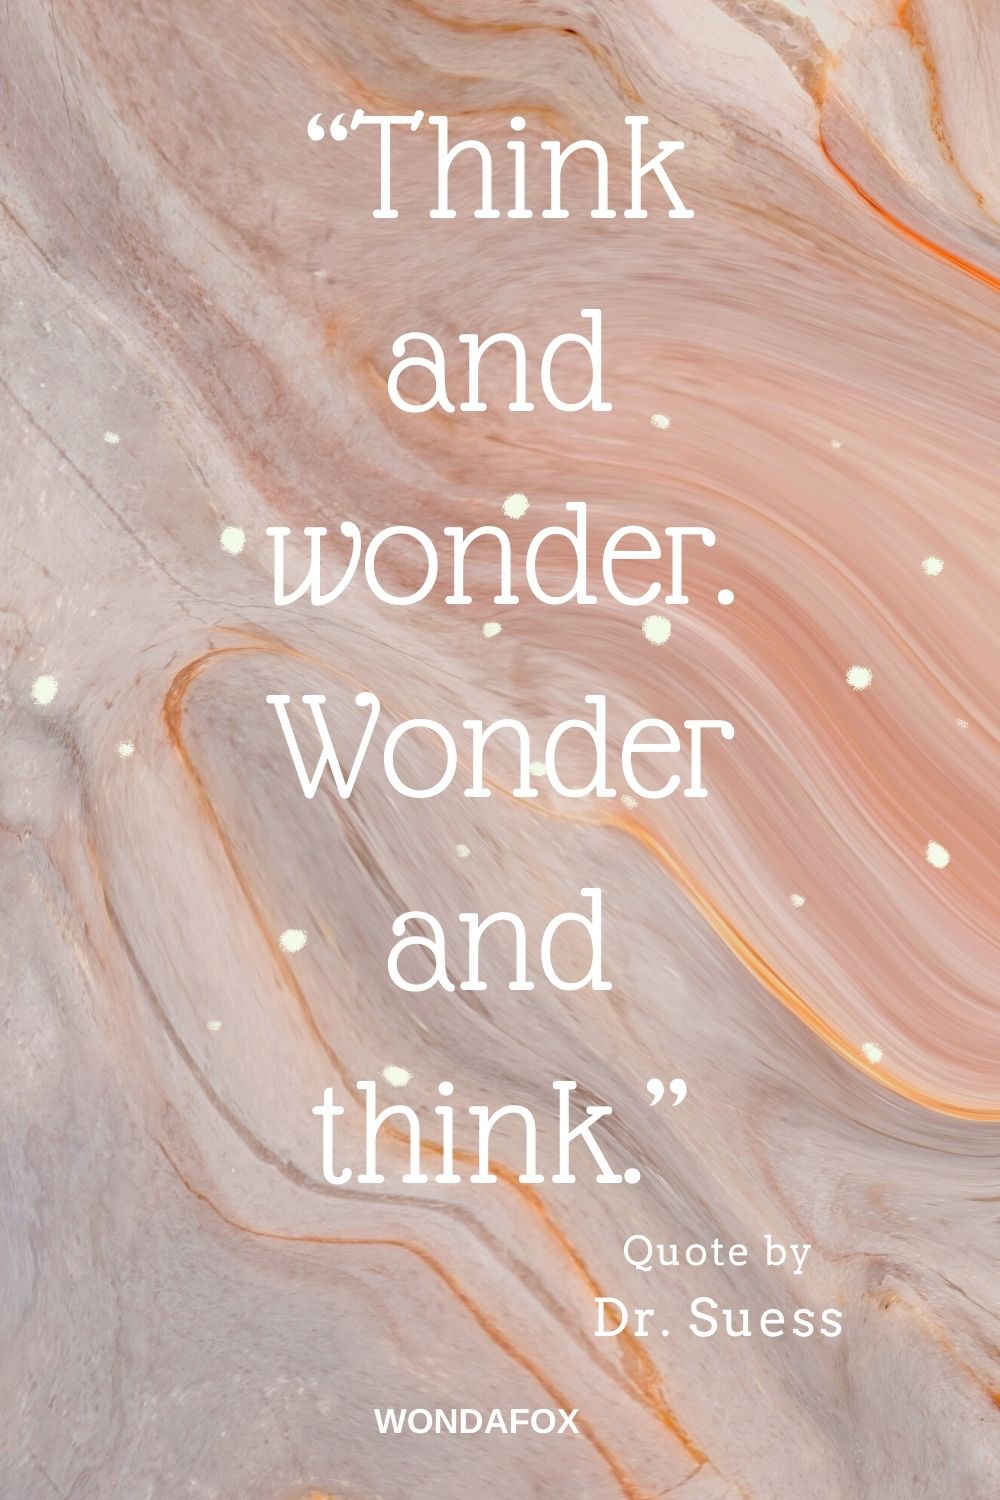 “Think and wonder. Wonder and think.”
Dr. Suess